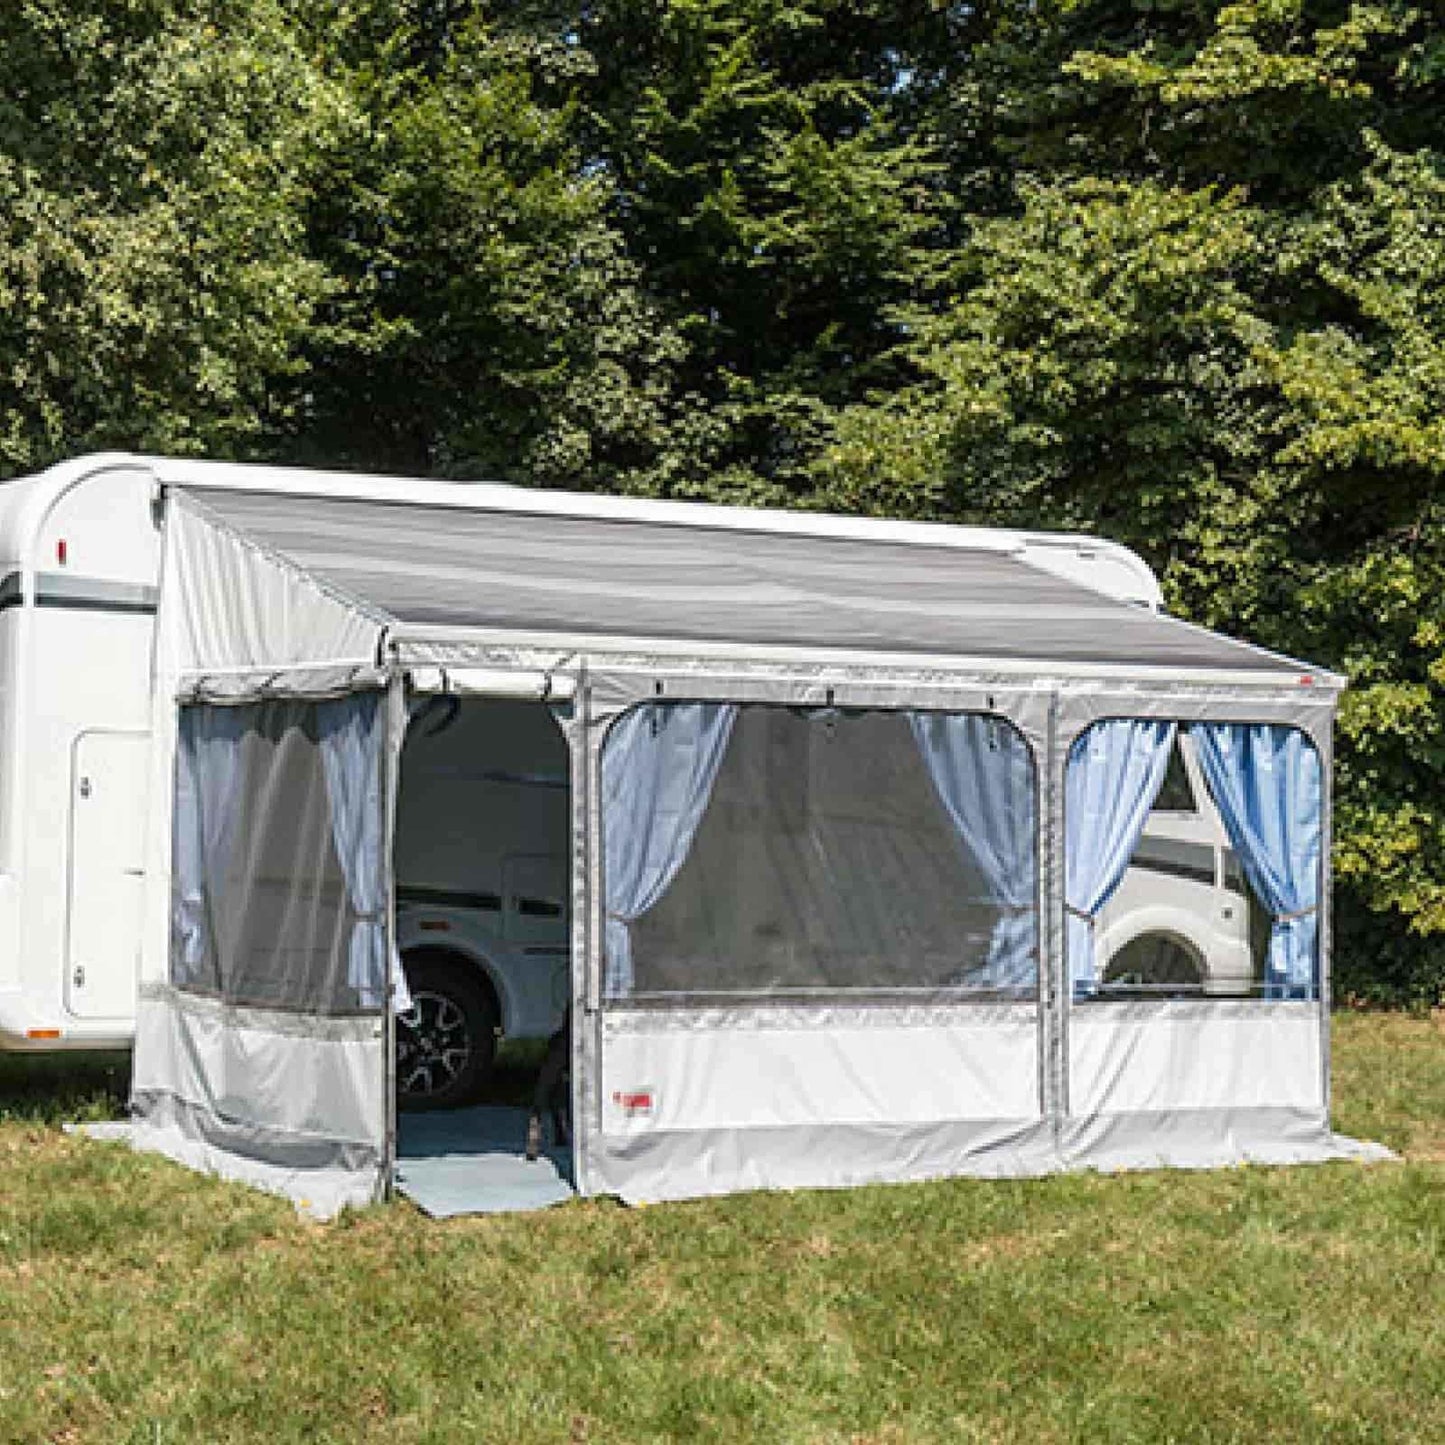 Fiamma F65 Privacy Room made by Fiamma. A Tent sold by Quality Caravan Awnings